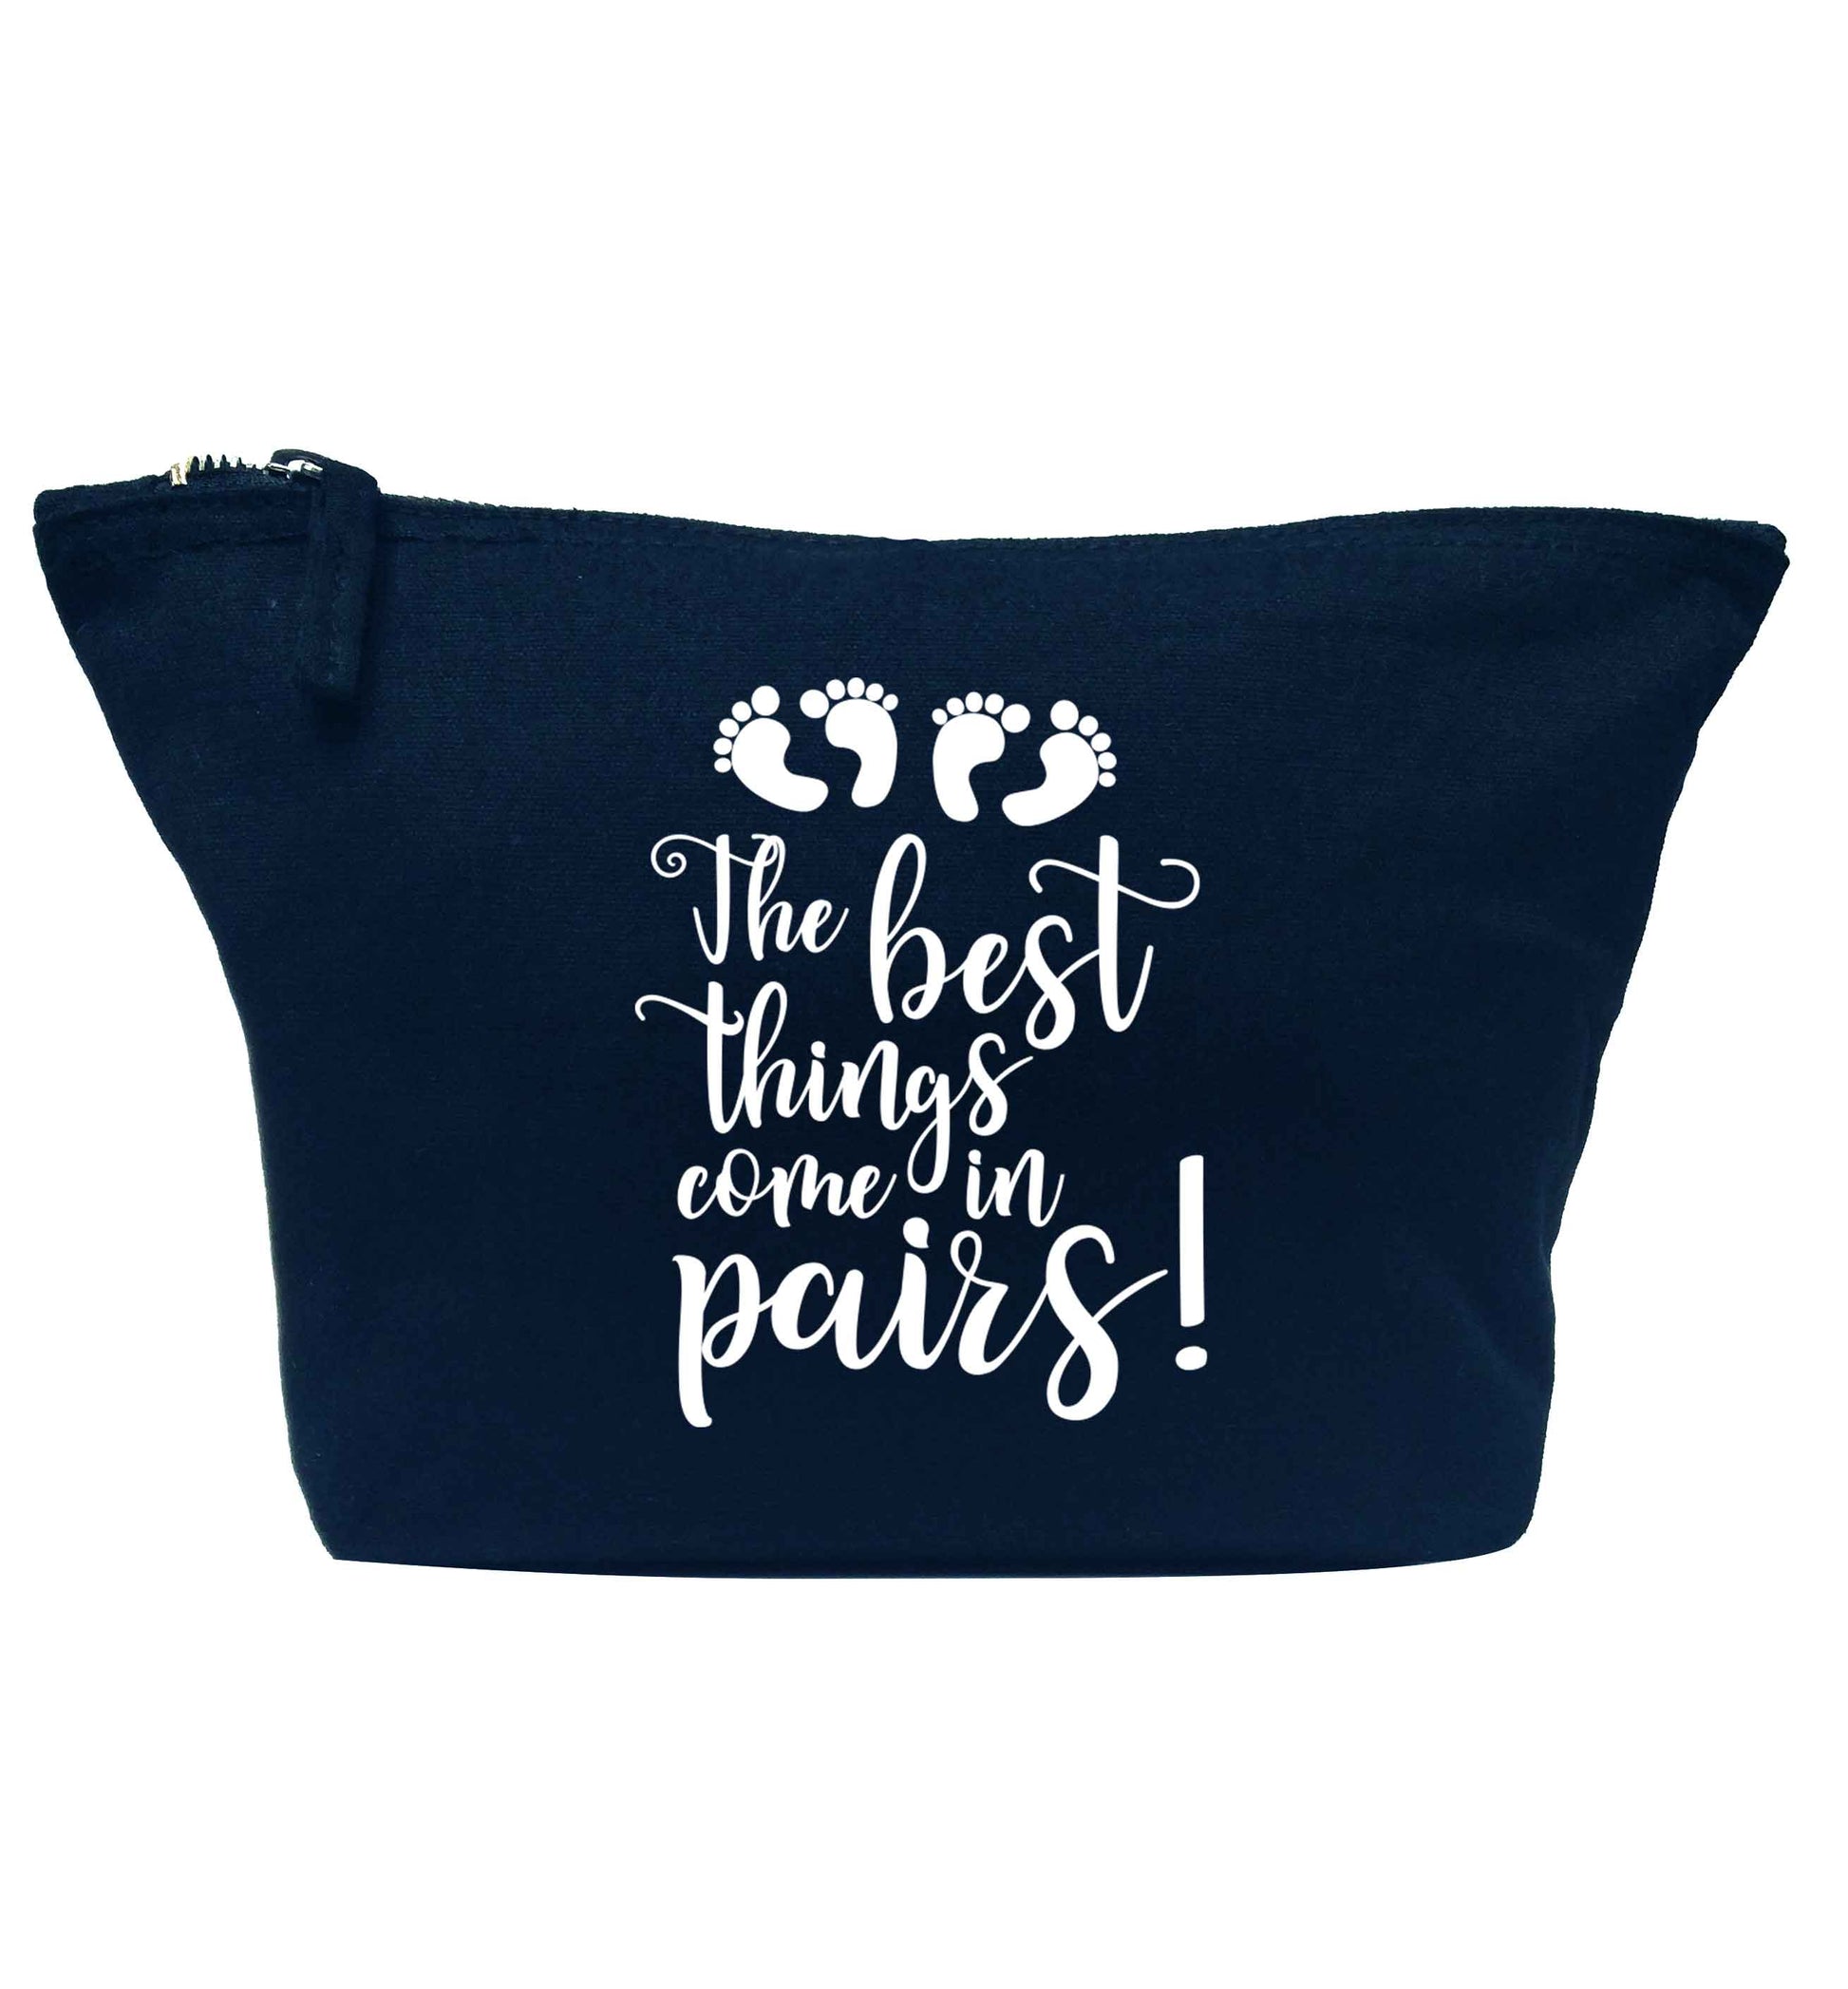 The best things come in pairs! navy makeup bag